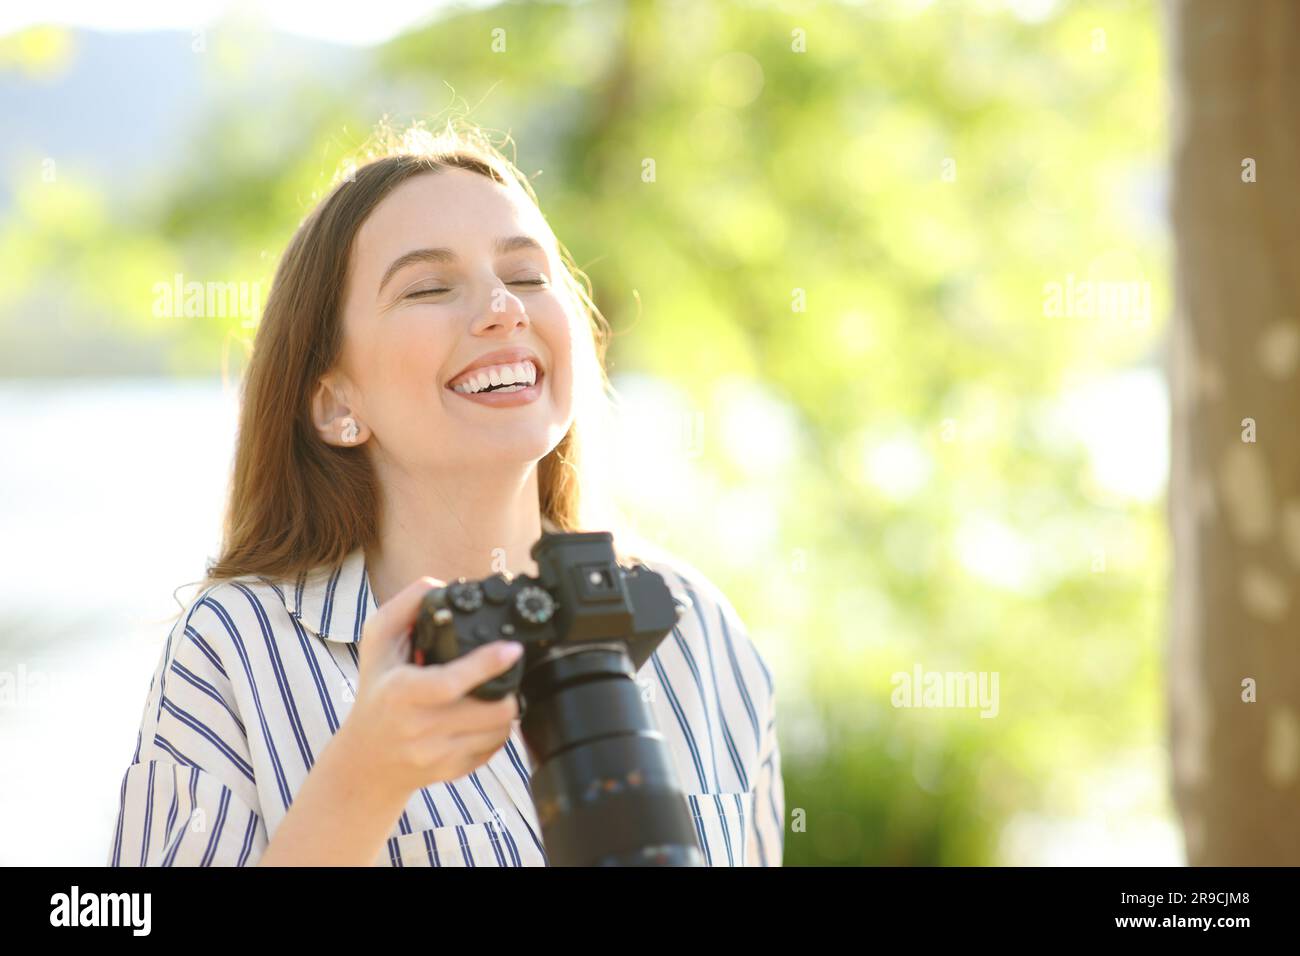 Happy photographer breathing fresh air holding camera standing in nature Stock Photo